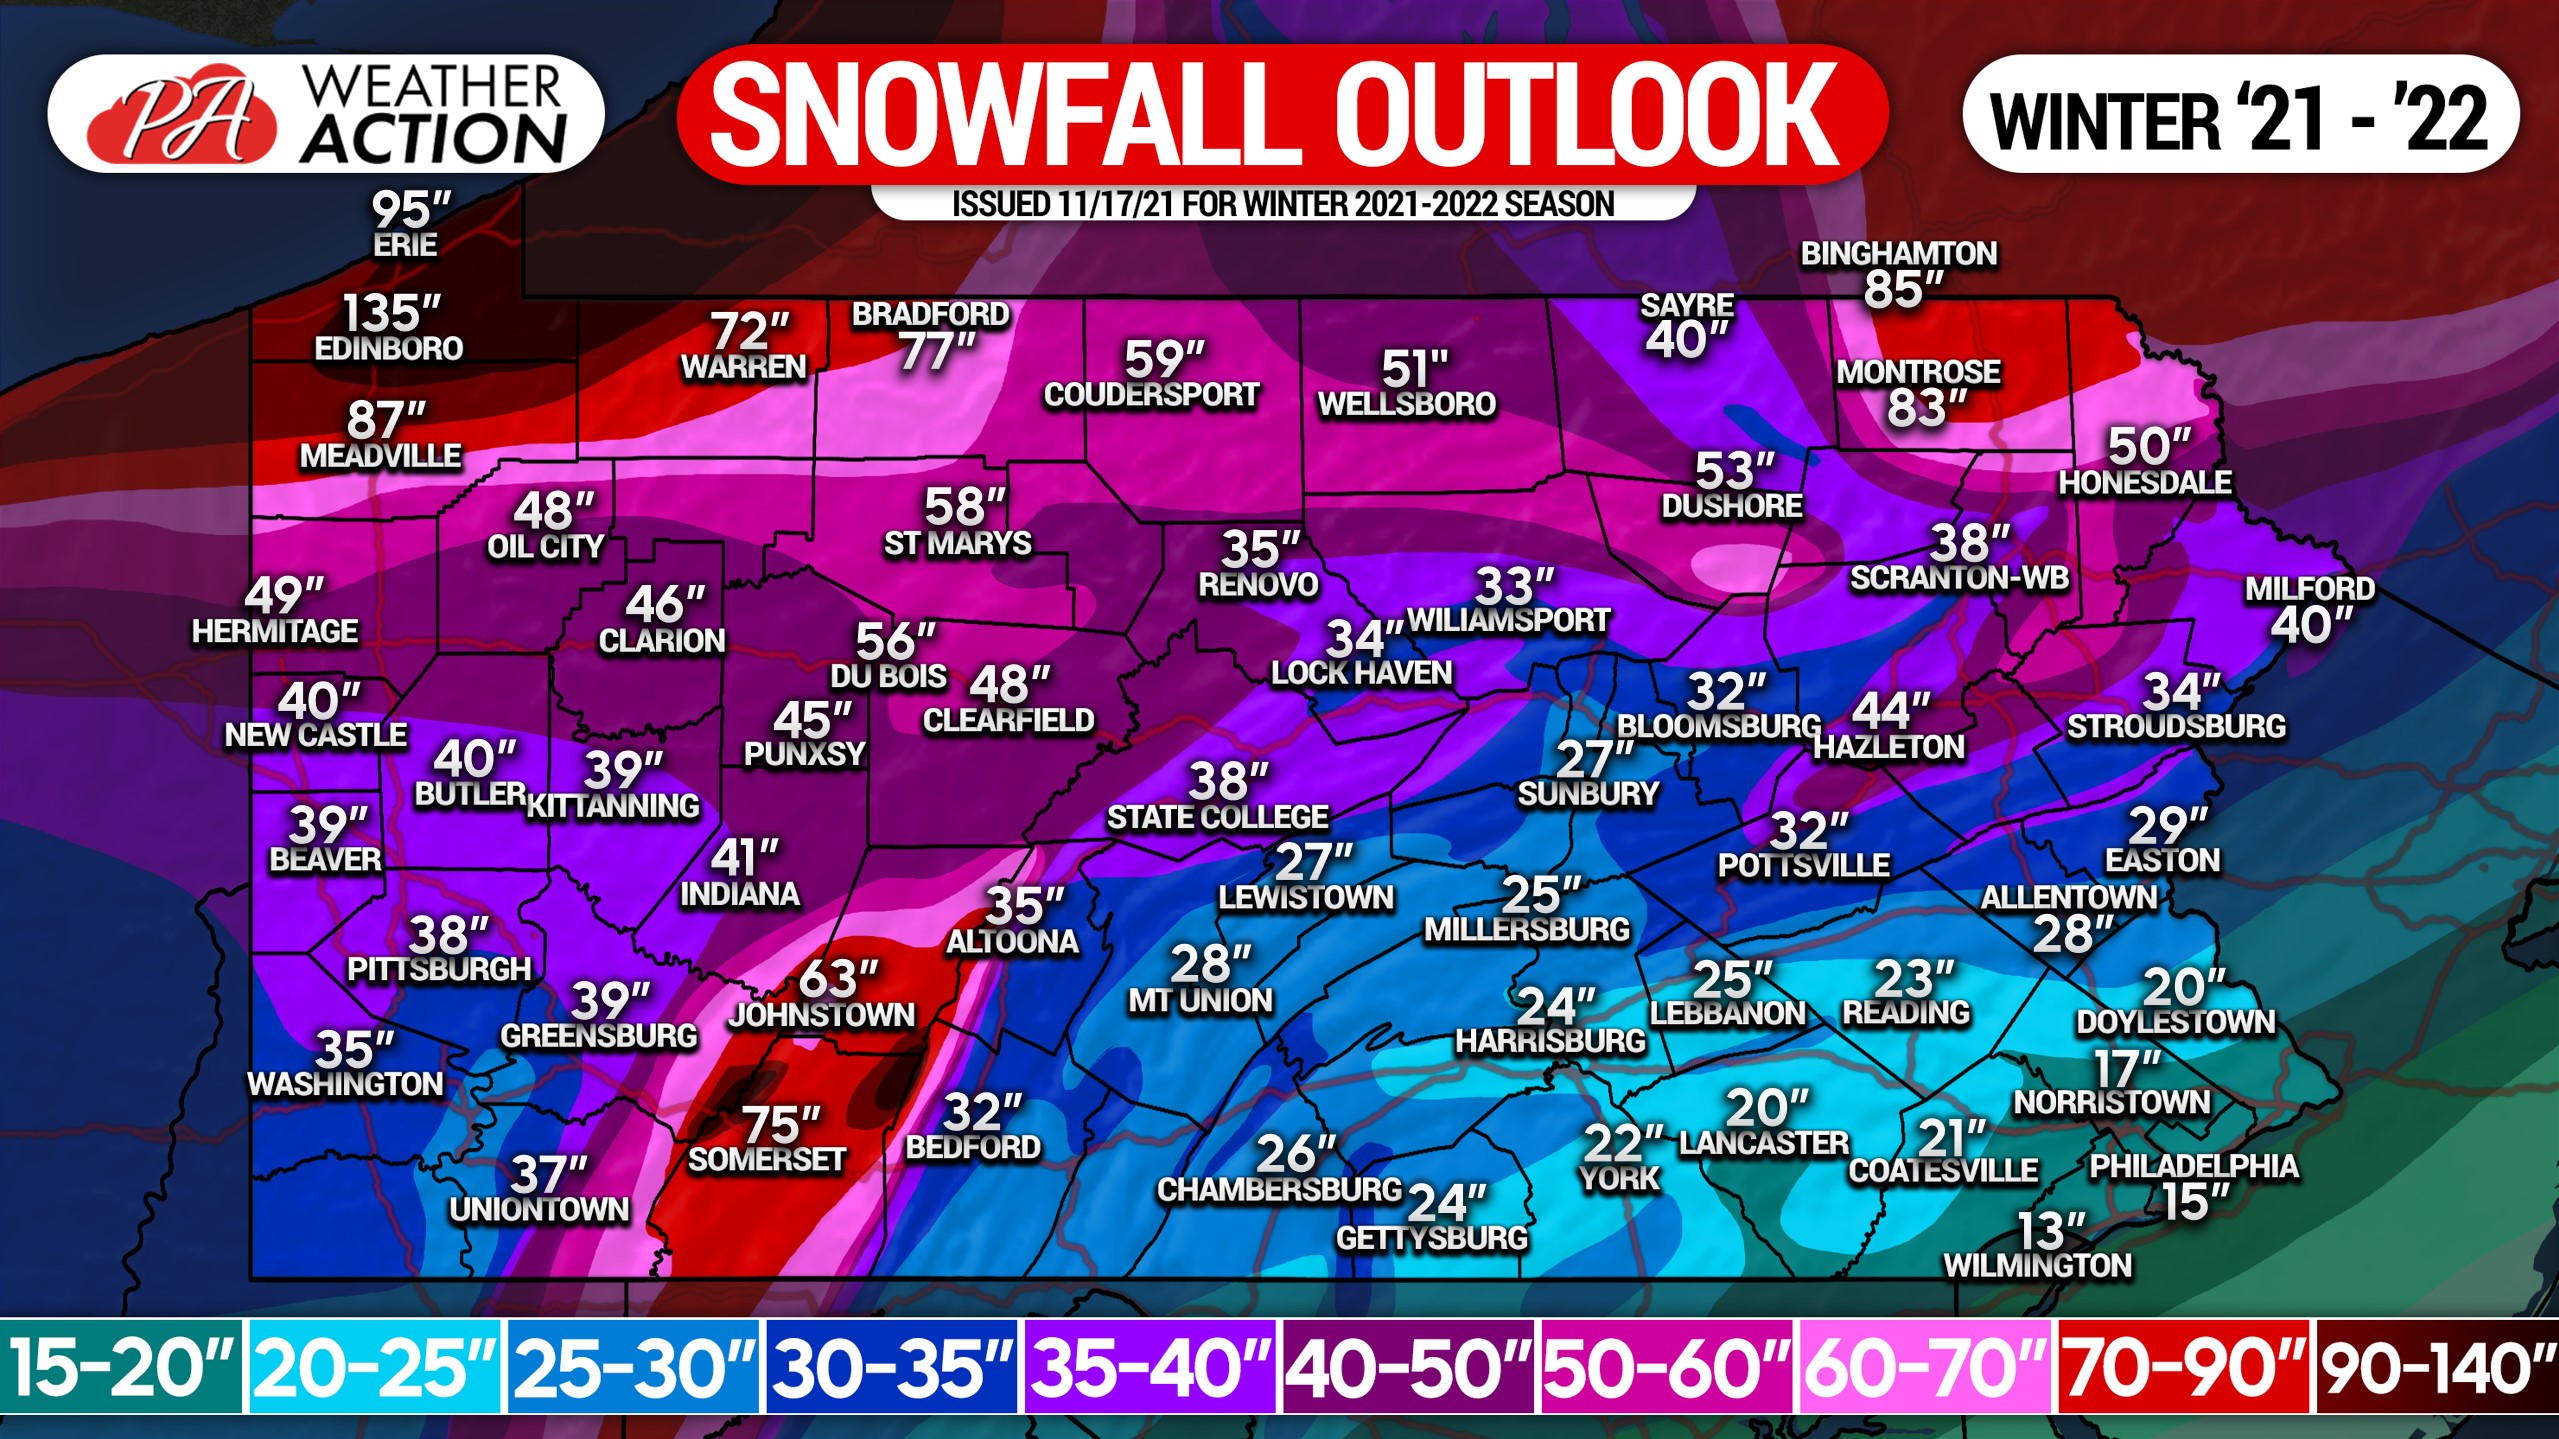 Official 2021 - 2022 Winter Outlook & Town-By-Town Snowfall